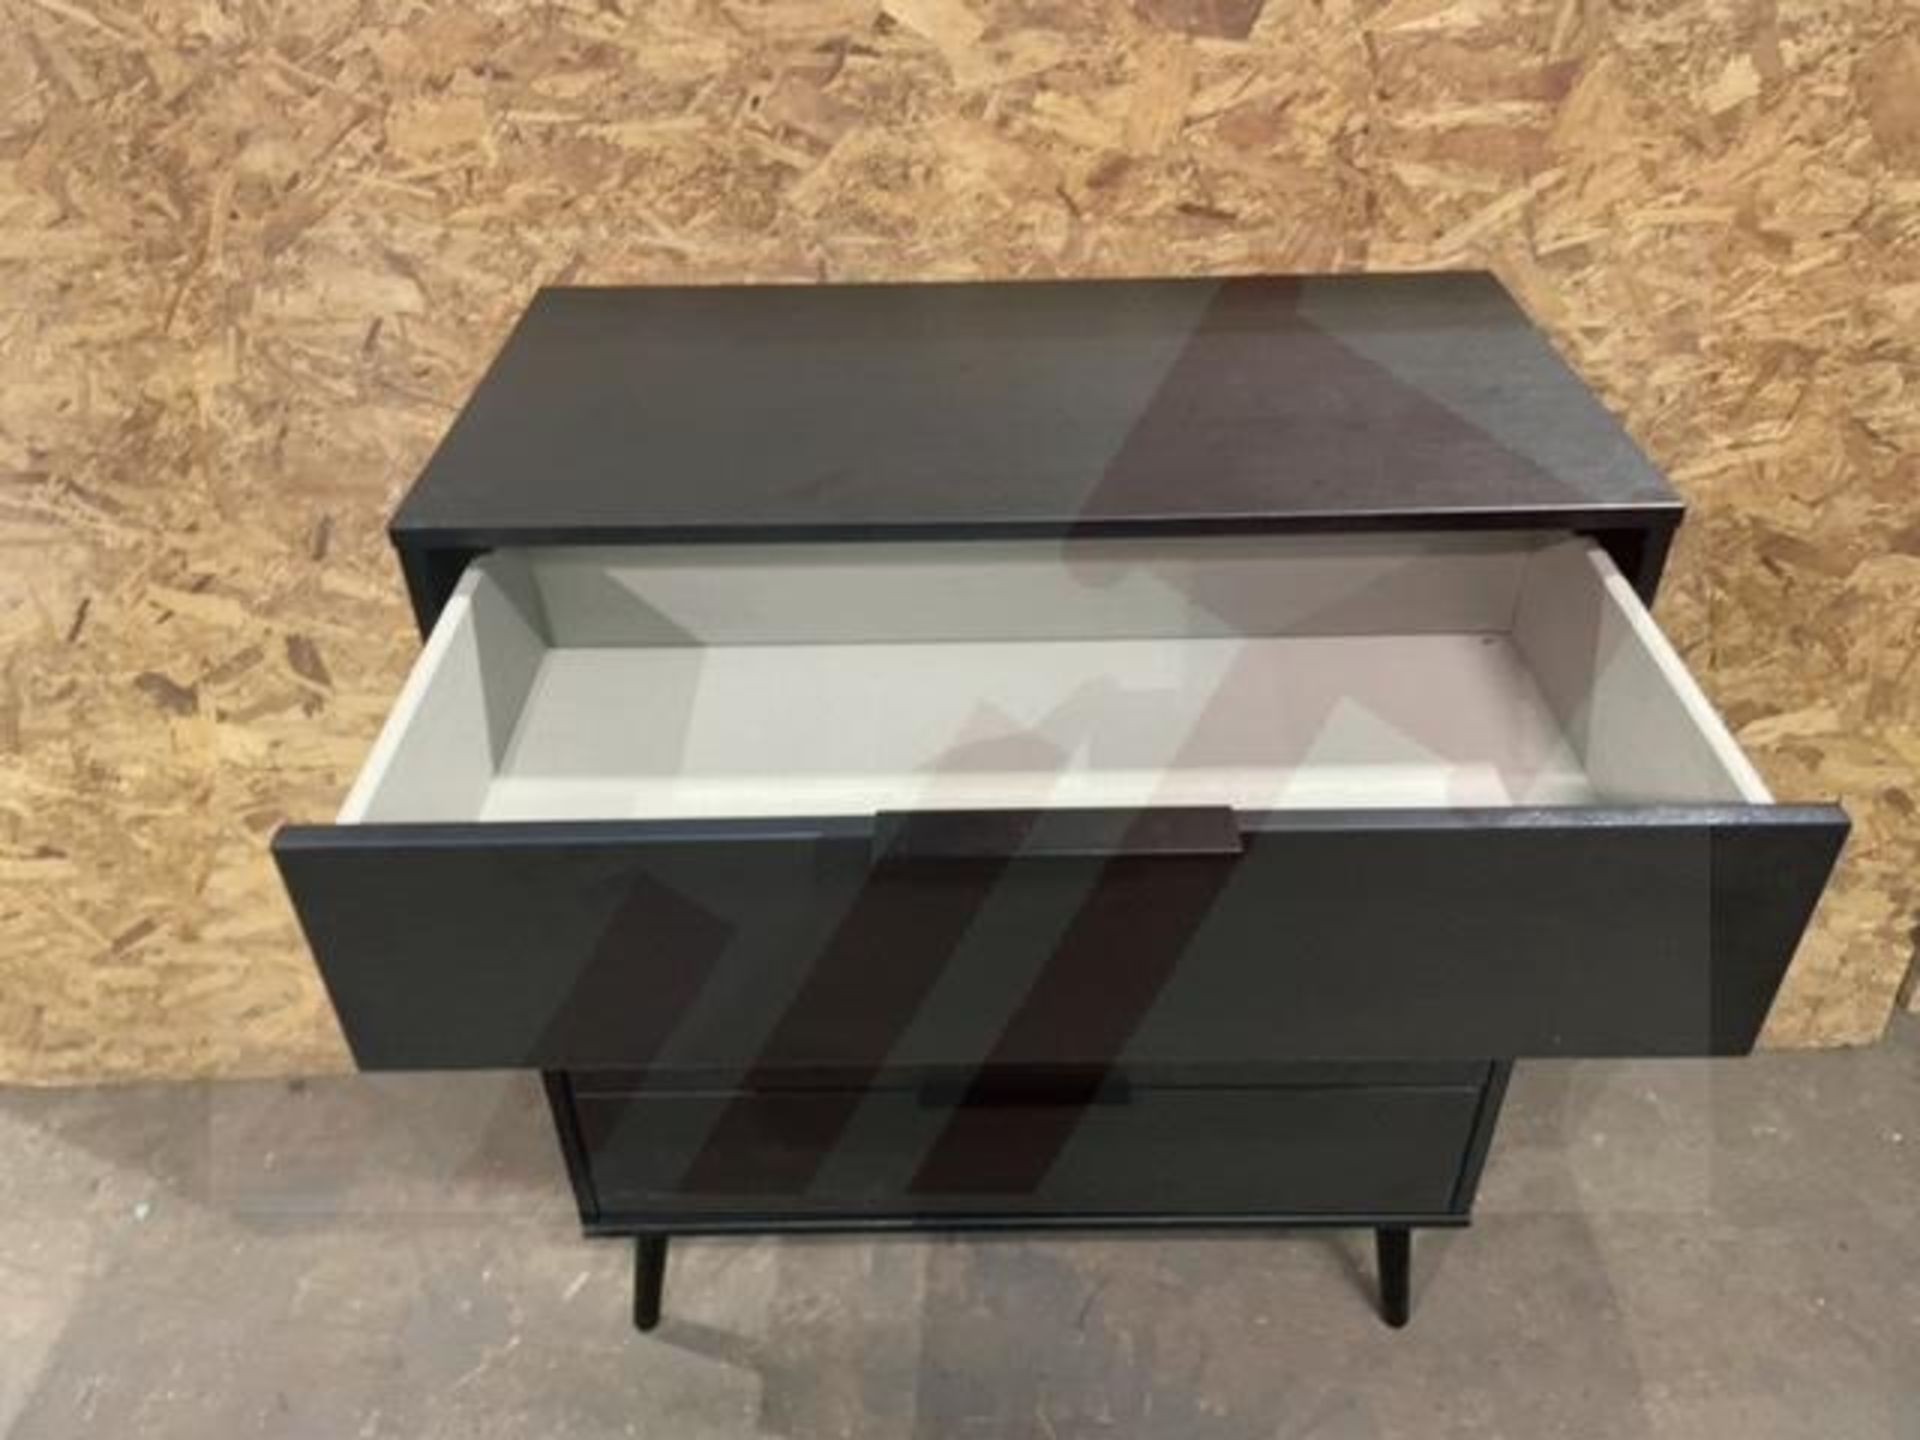 4 Drawer Chest of Drawers | Black Wood Effect | On Legs 67x40x91cm - Image 2 of 3